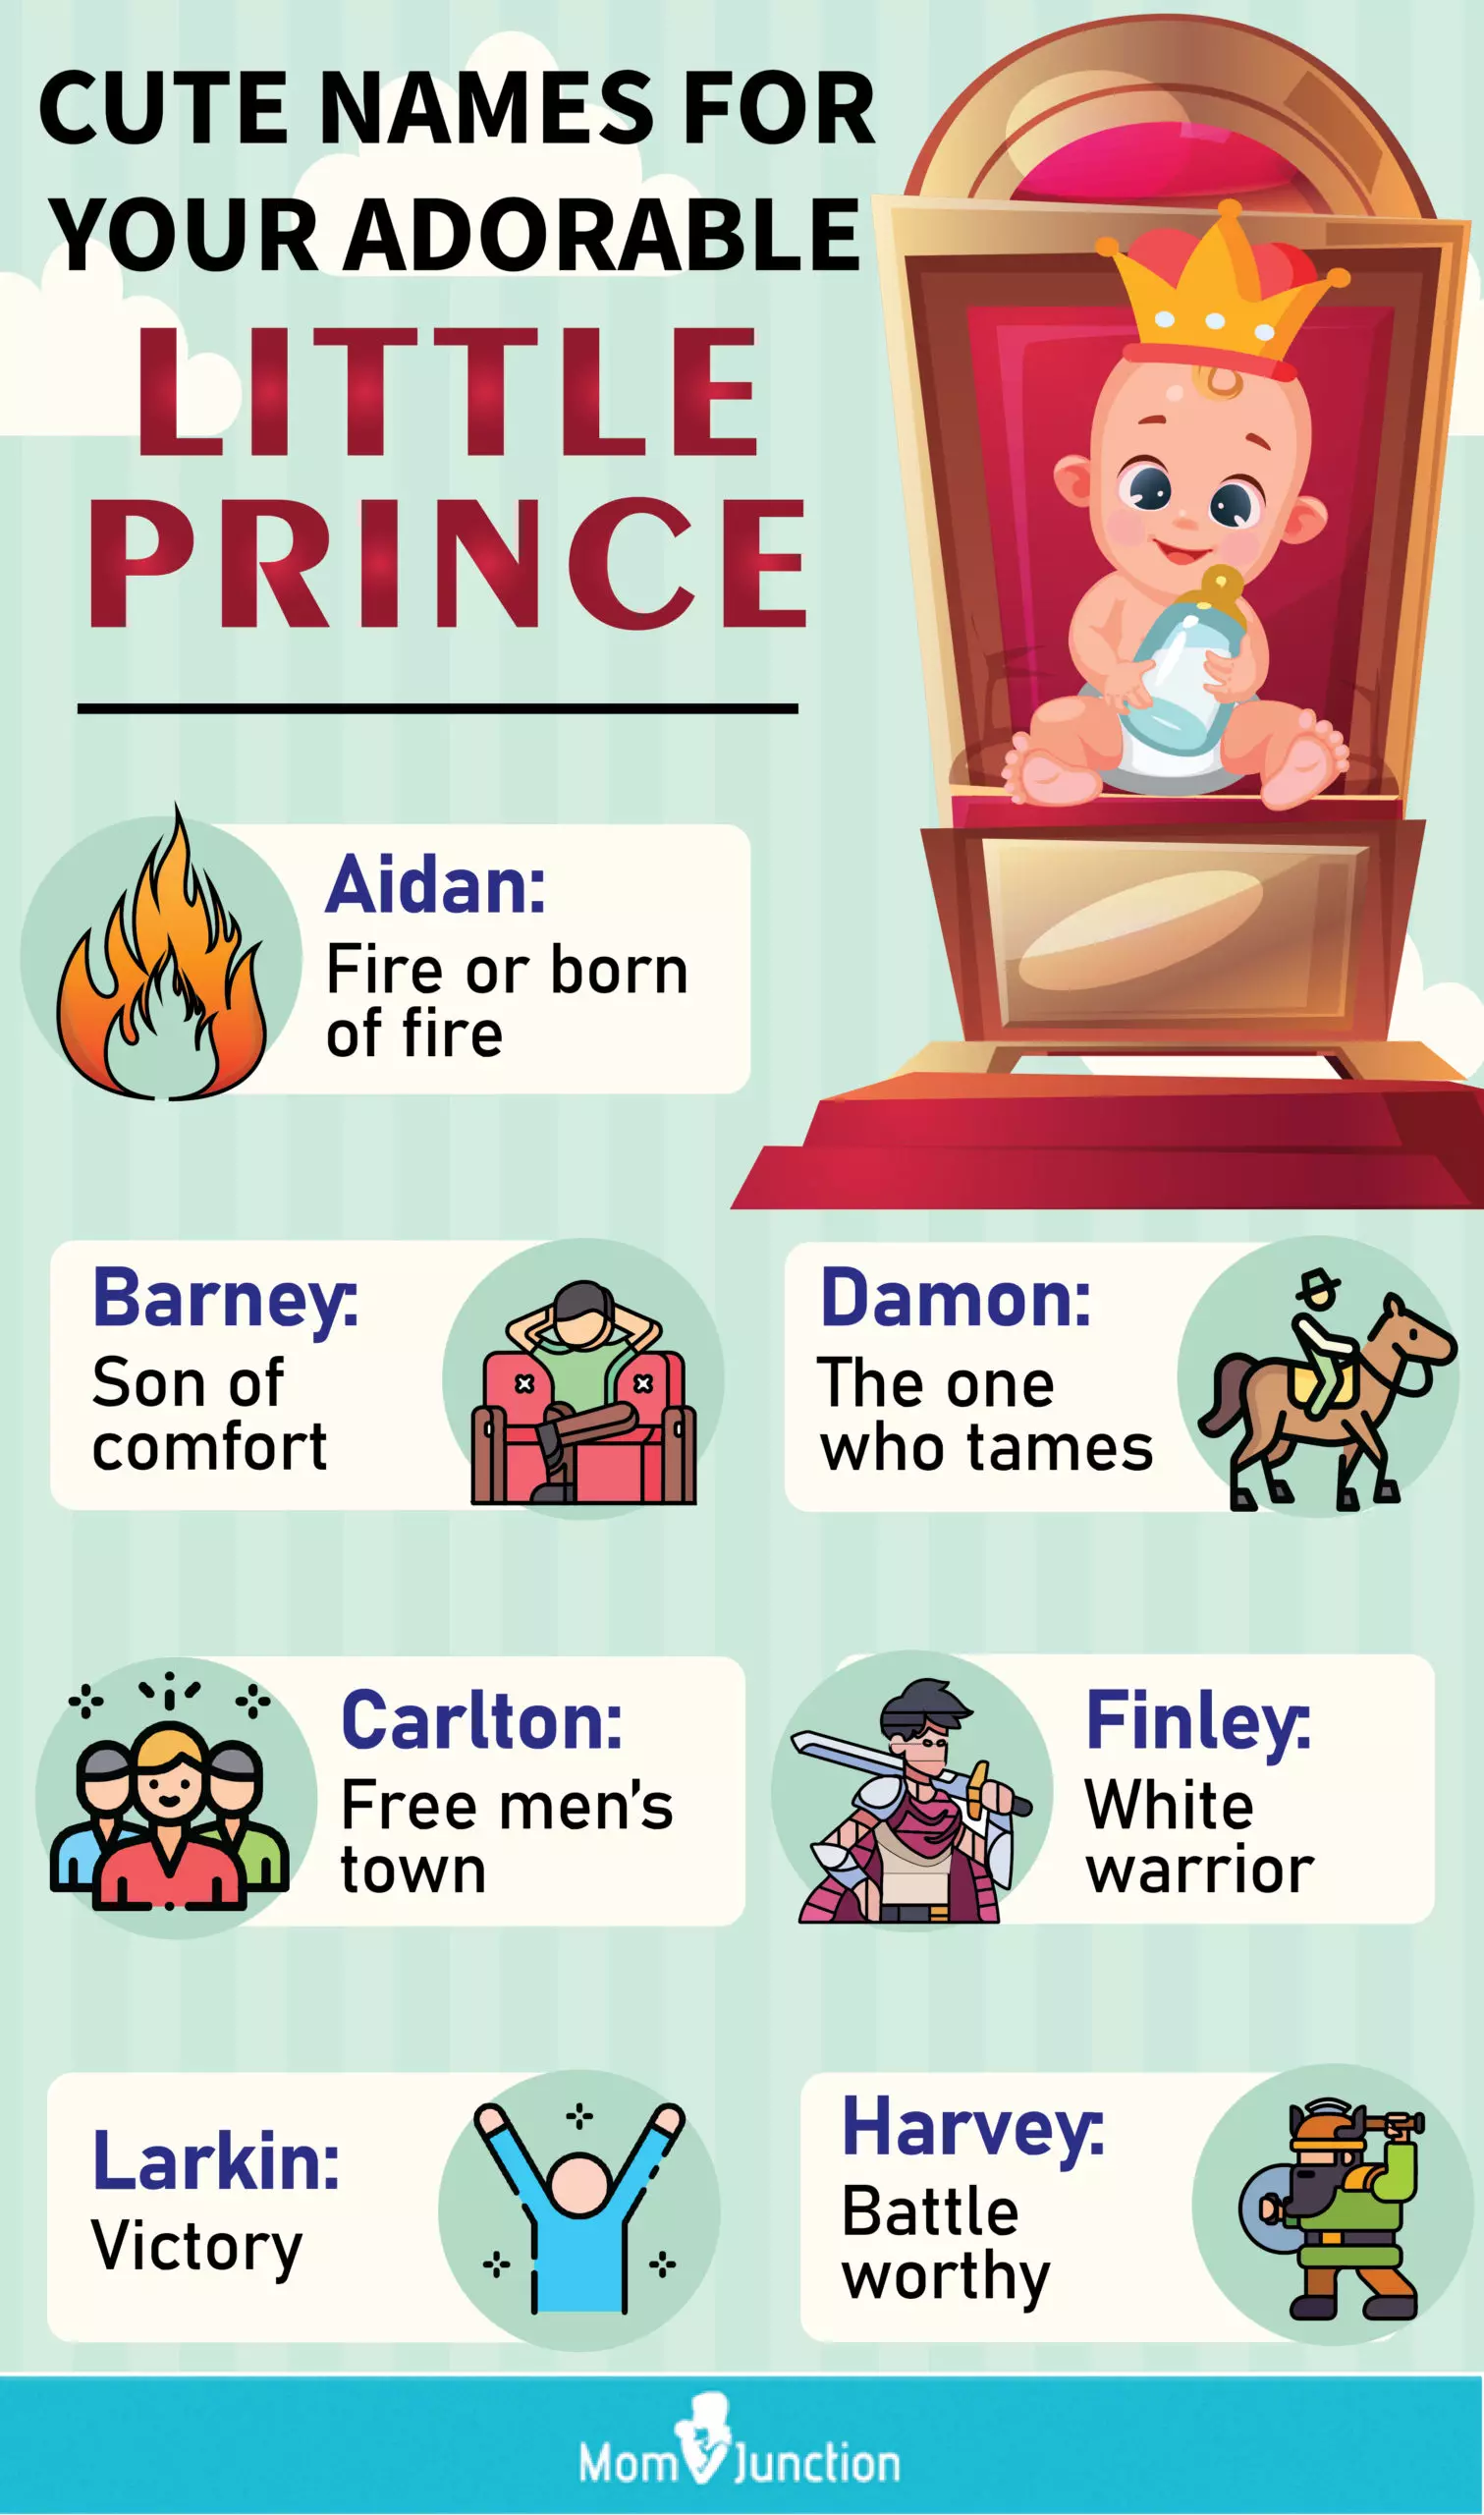 names dor your adorable little prince (infographic)